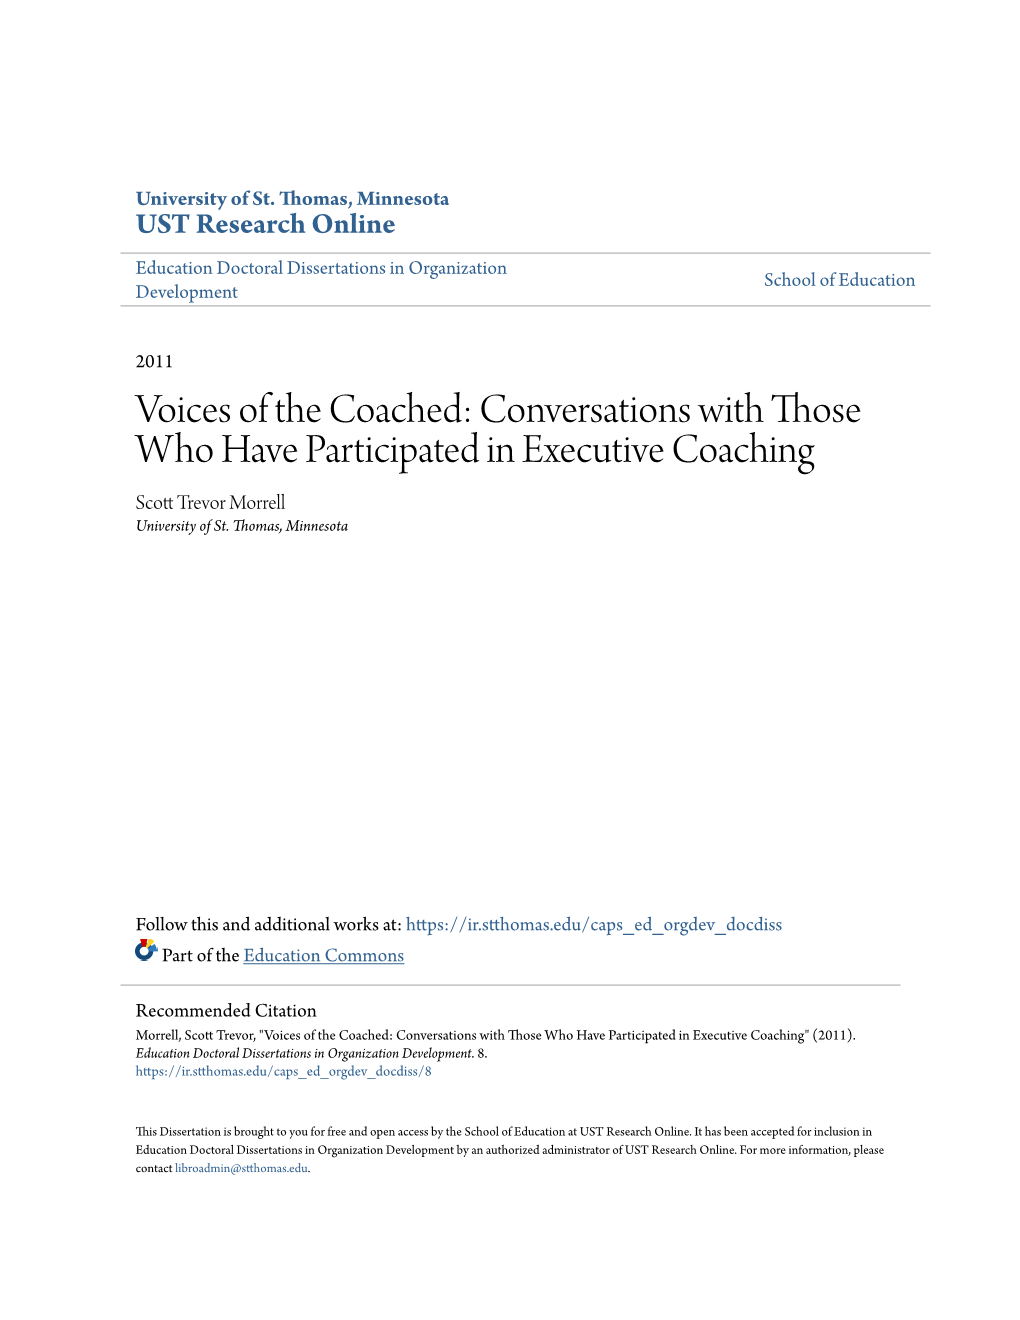 Voices of the Coached: Conversations with Those Who Have Participated in Executive Coaching Scott Rt Evor Morrell University of St